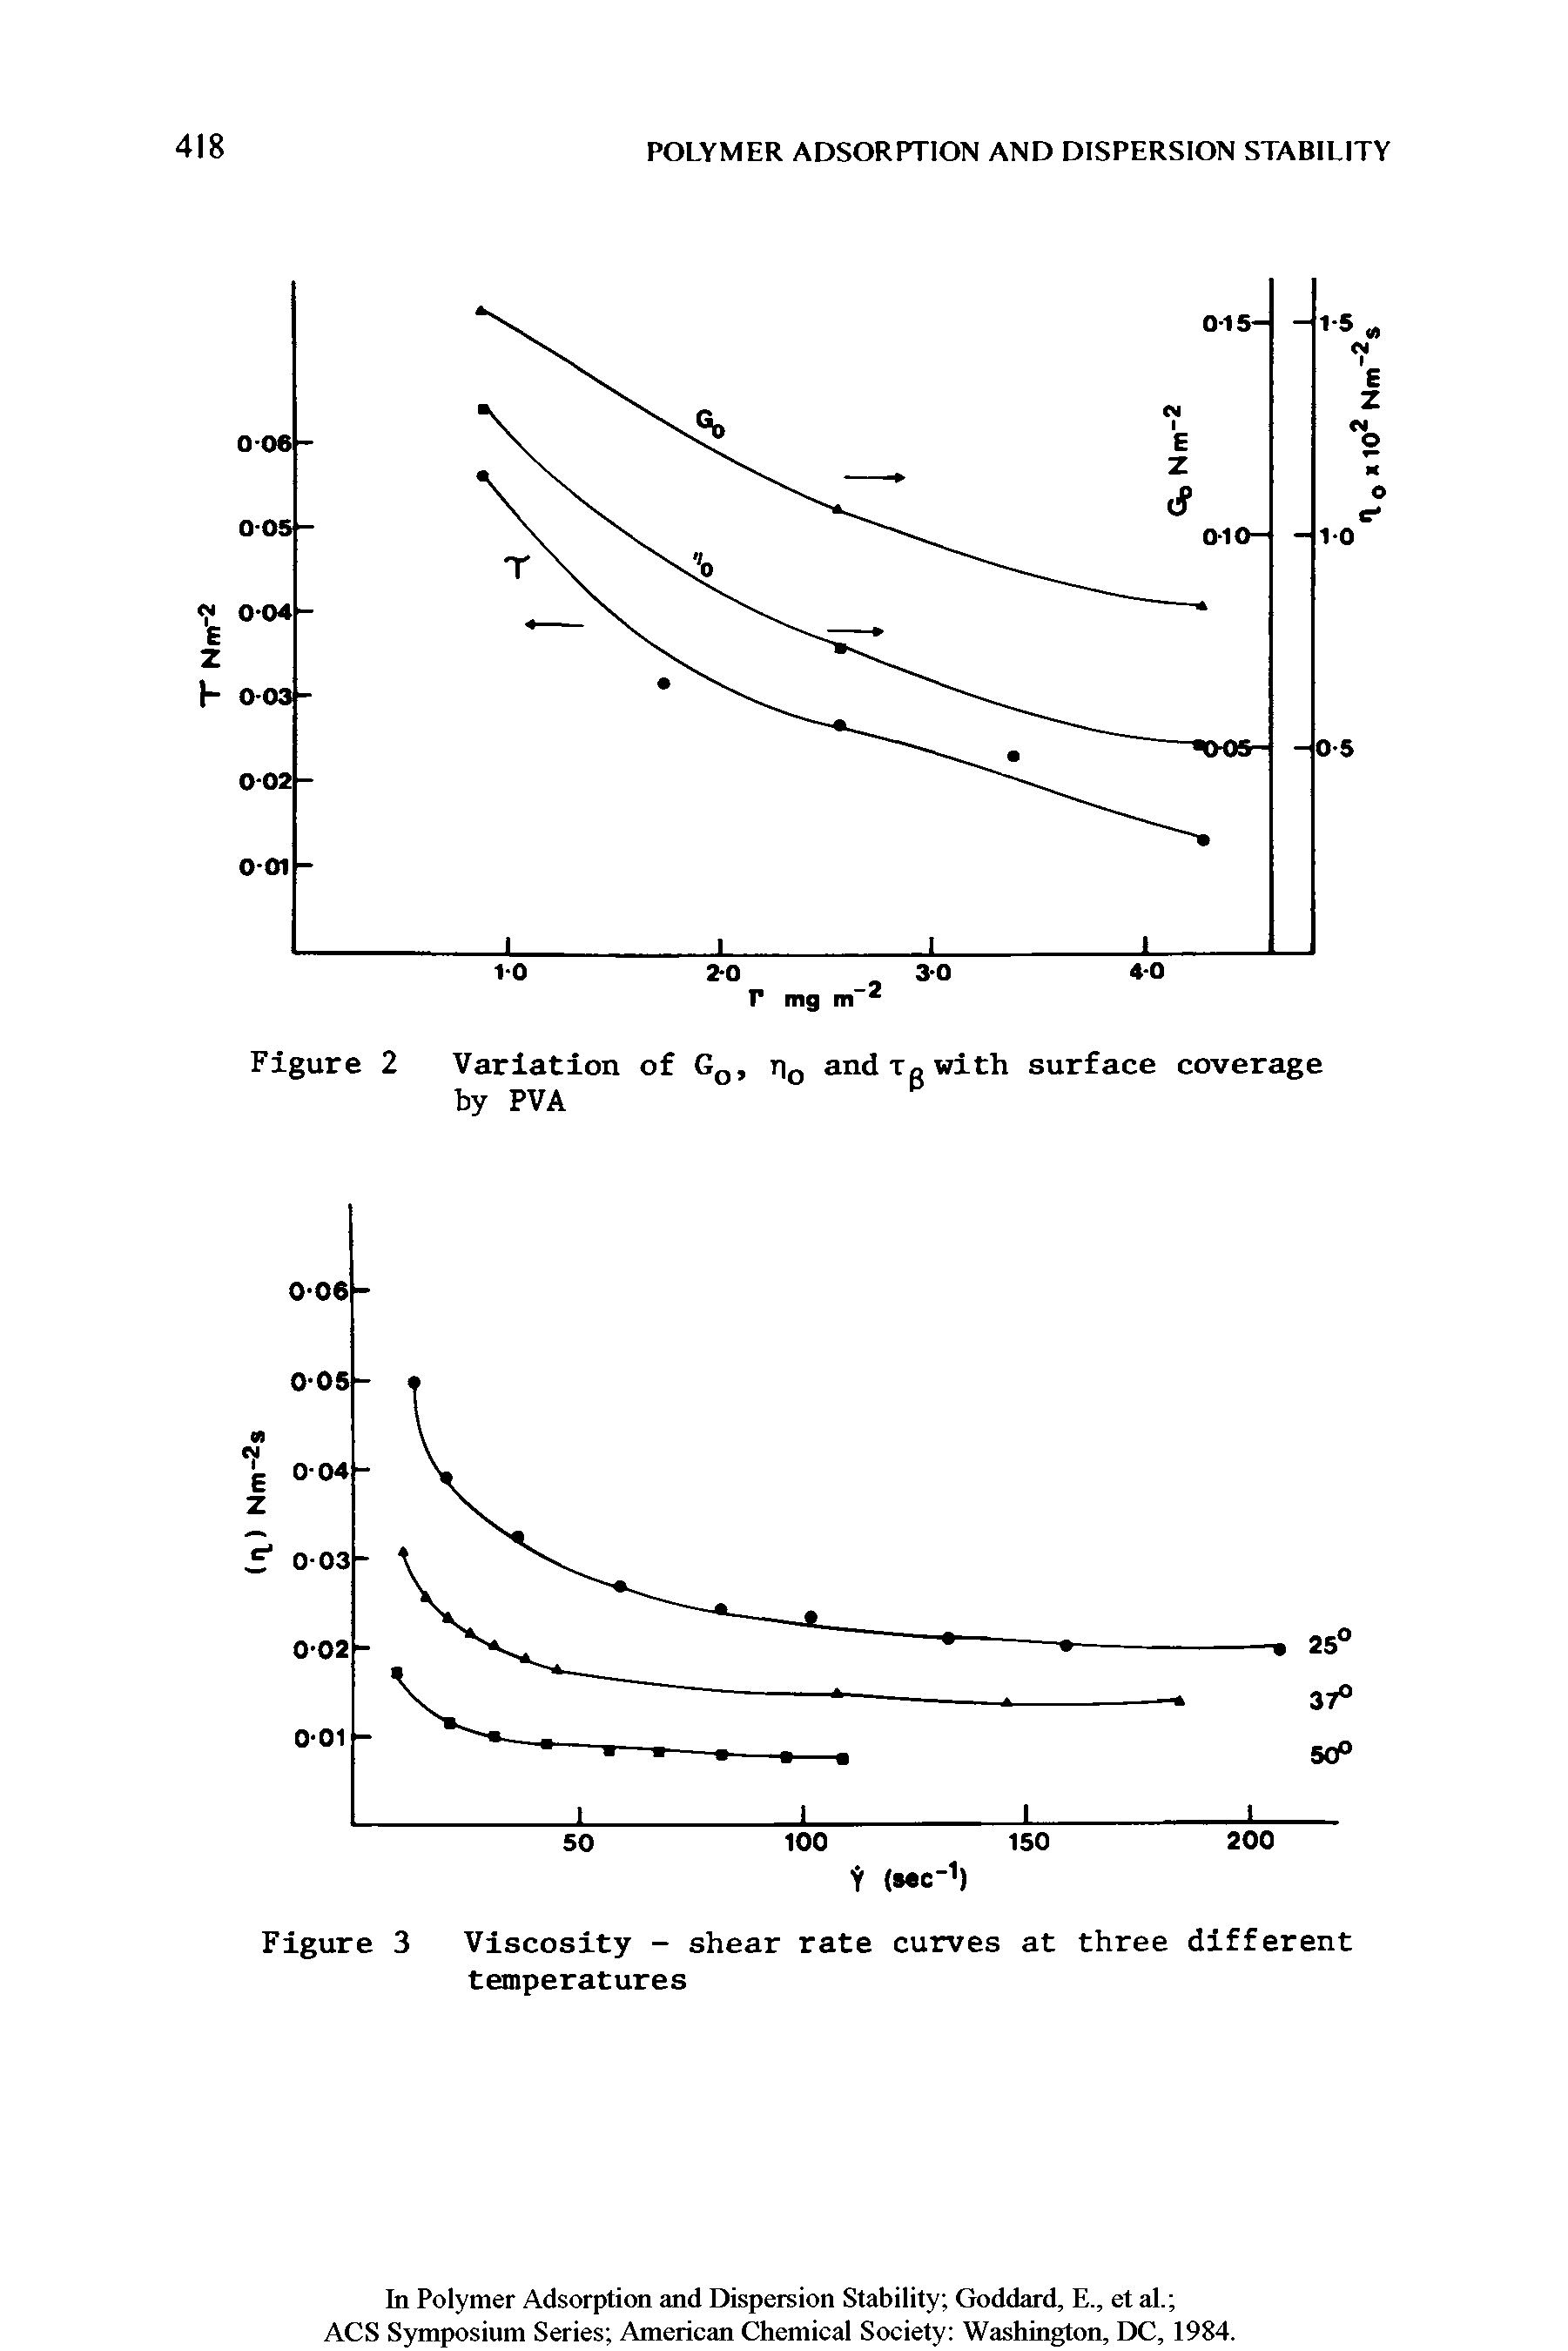 Figure 3 Viscosity - shear rate curves at three different temperatures...